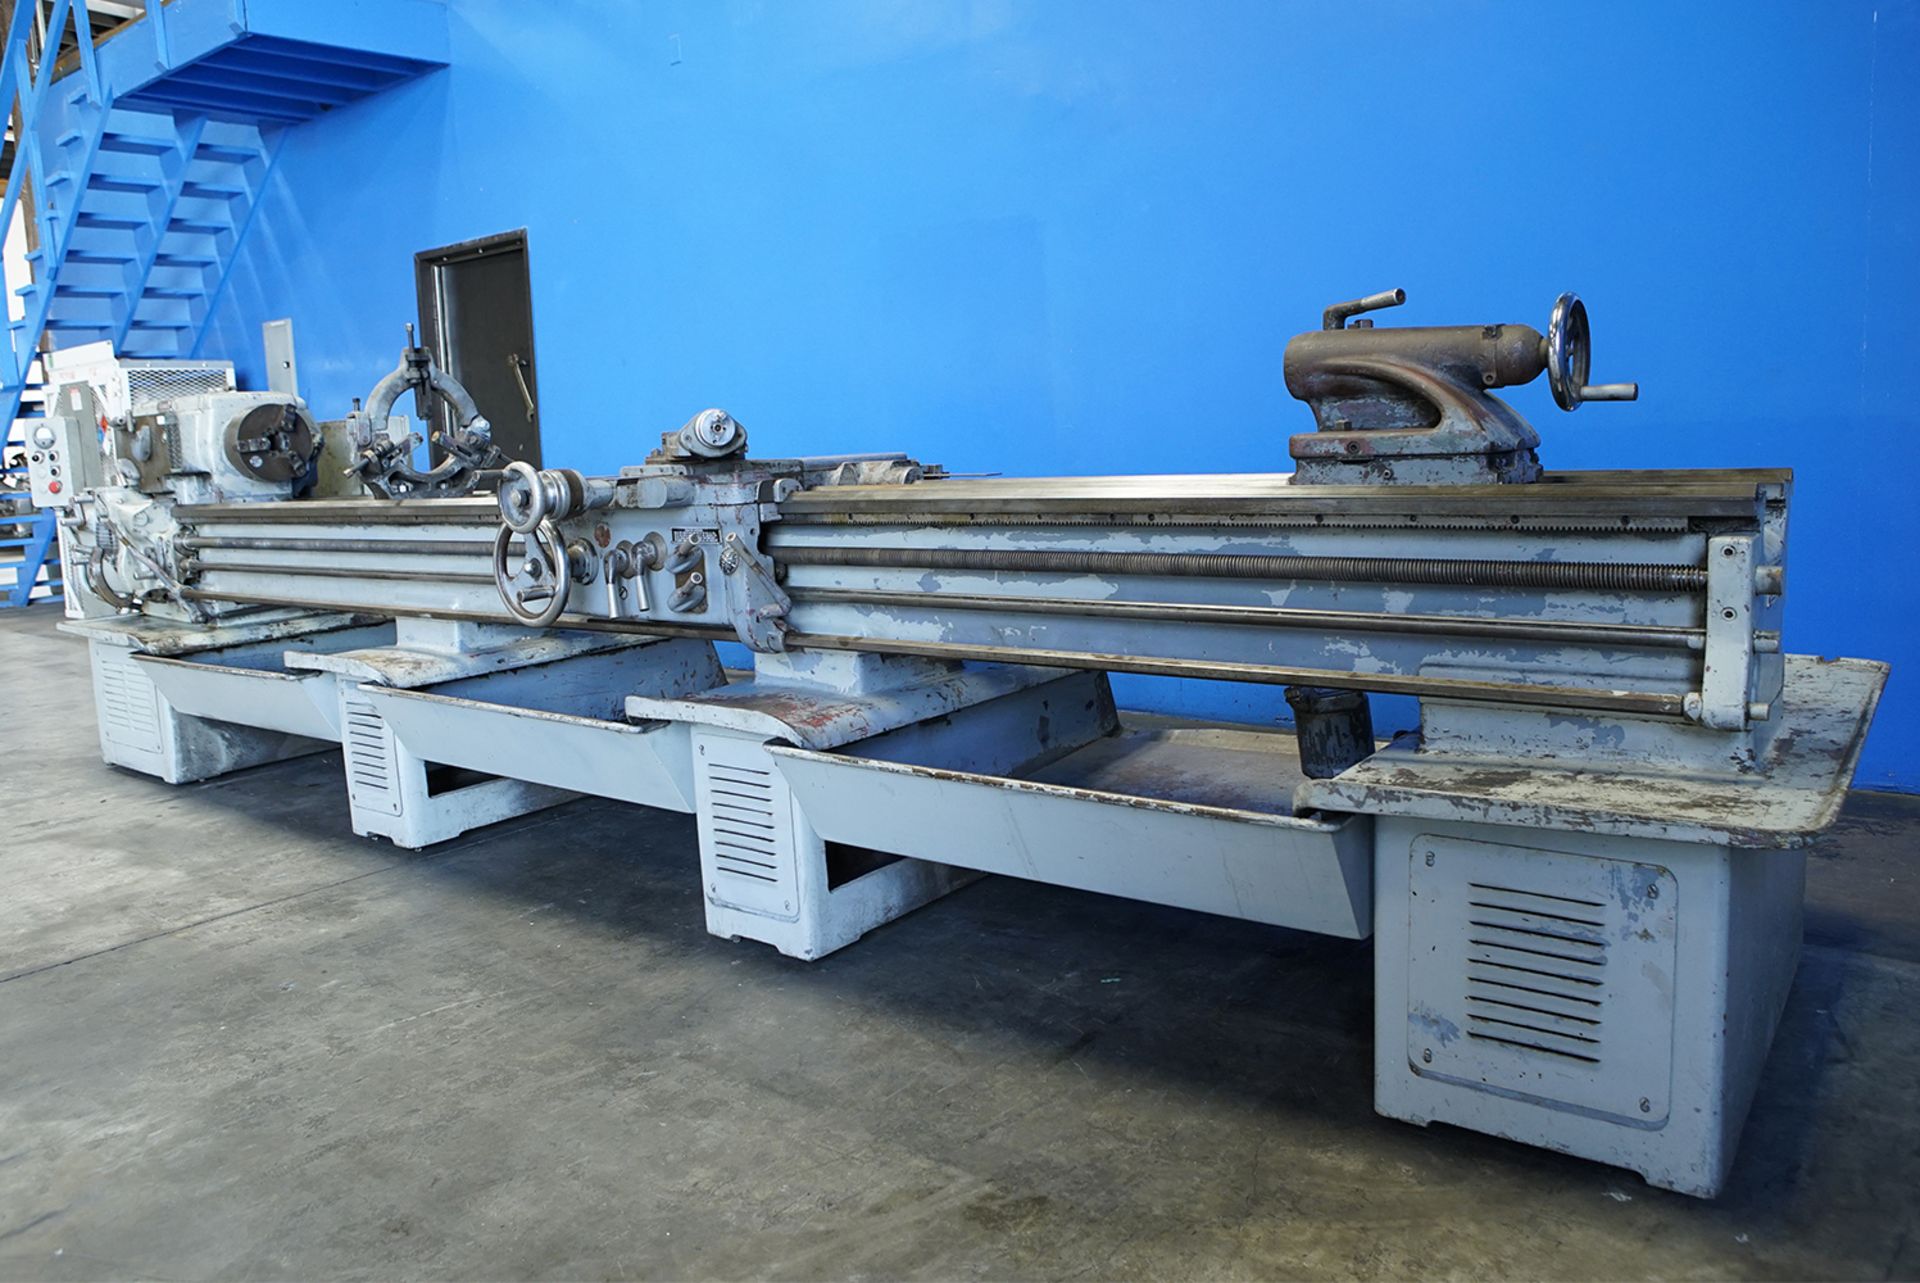 Sidney 16916 Lathe, 16” x 150”, 3-Jaw Chuck, Taper Attachment, Steady Rest (6431) - Image 2 of 10